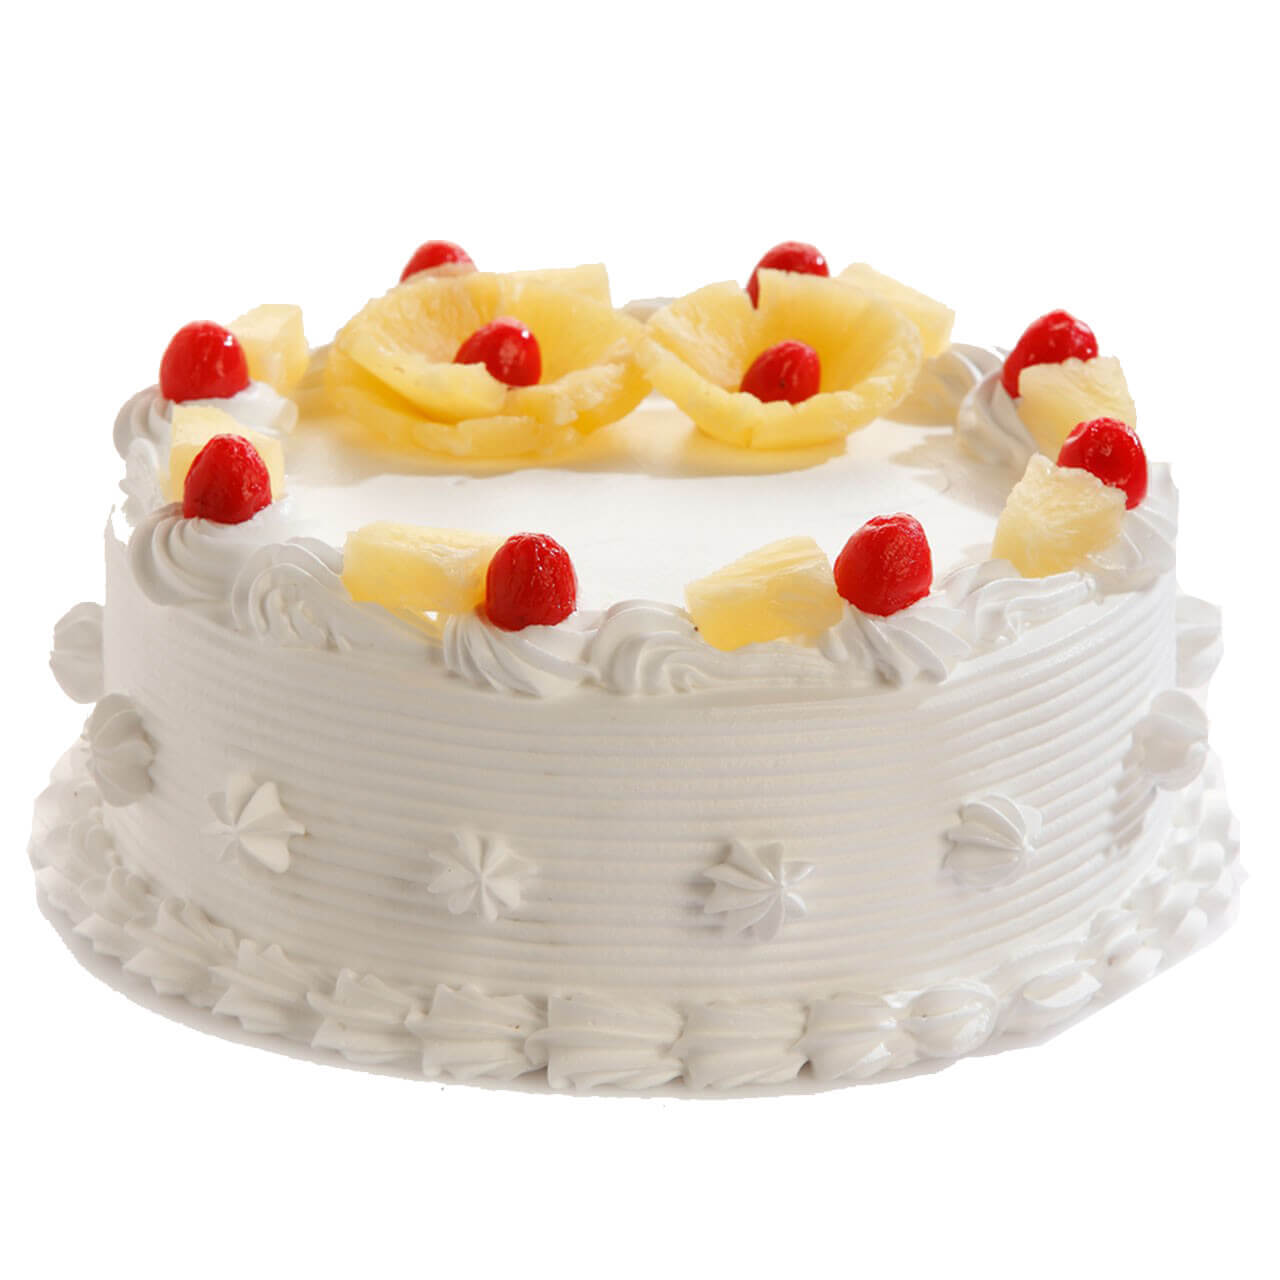 send Pineapple Cake Half Kg Any Occasion delivery